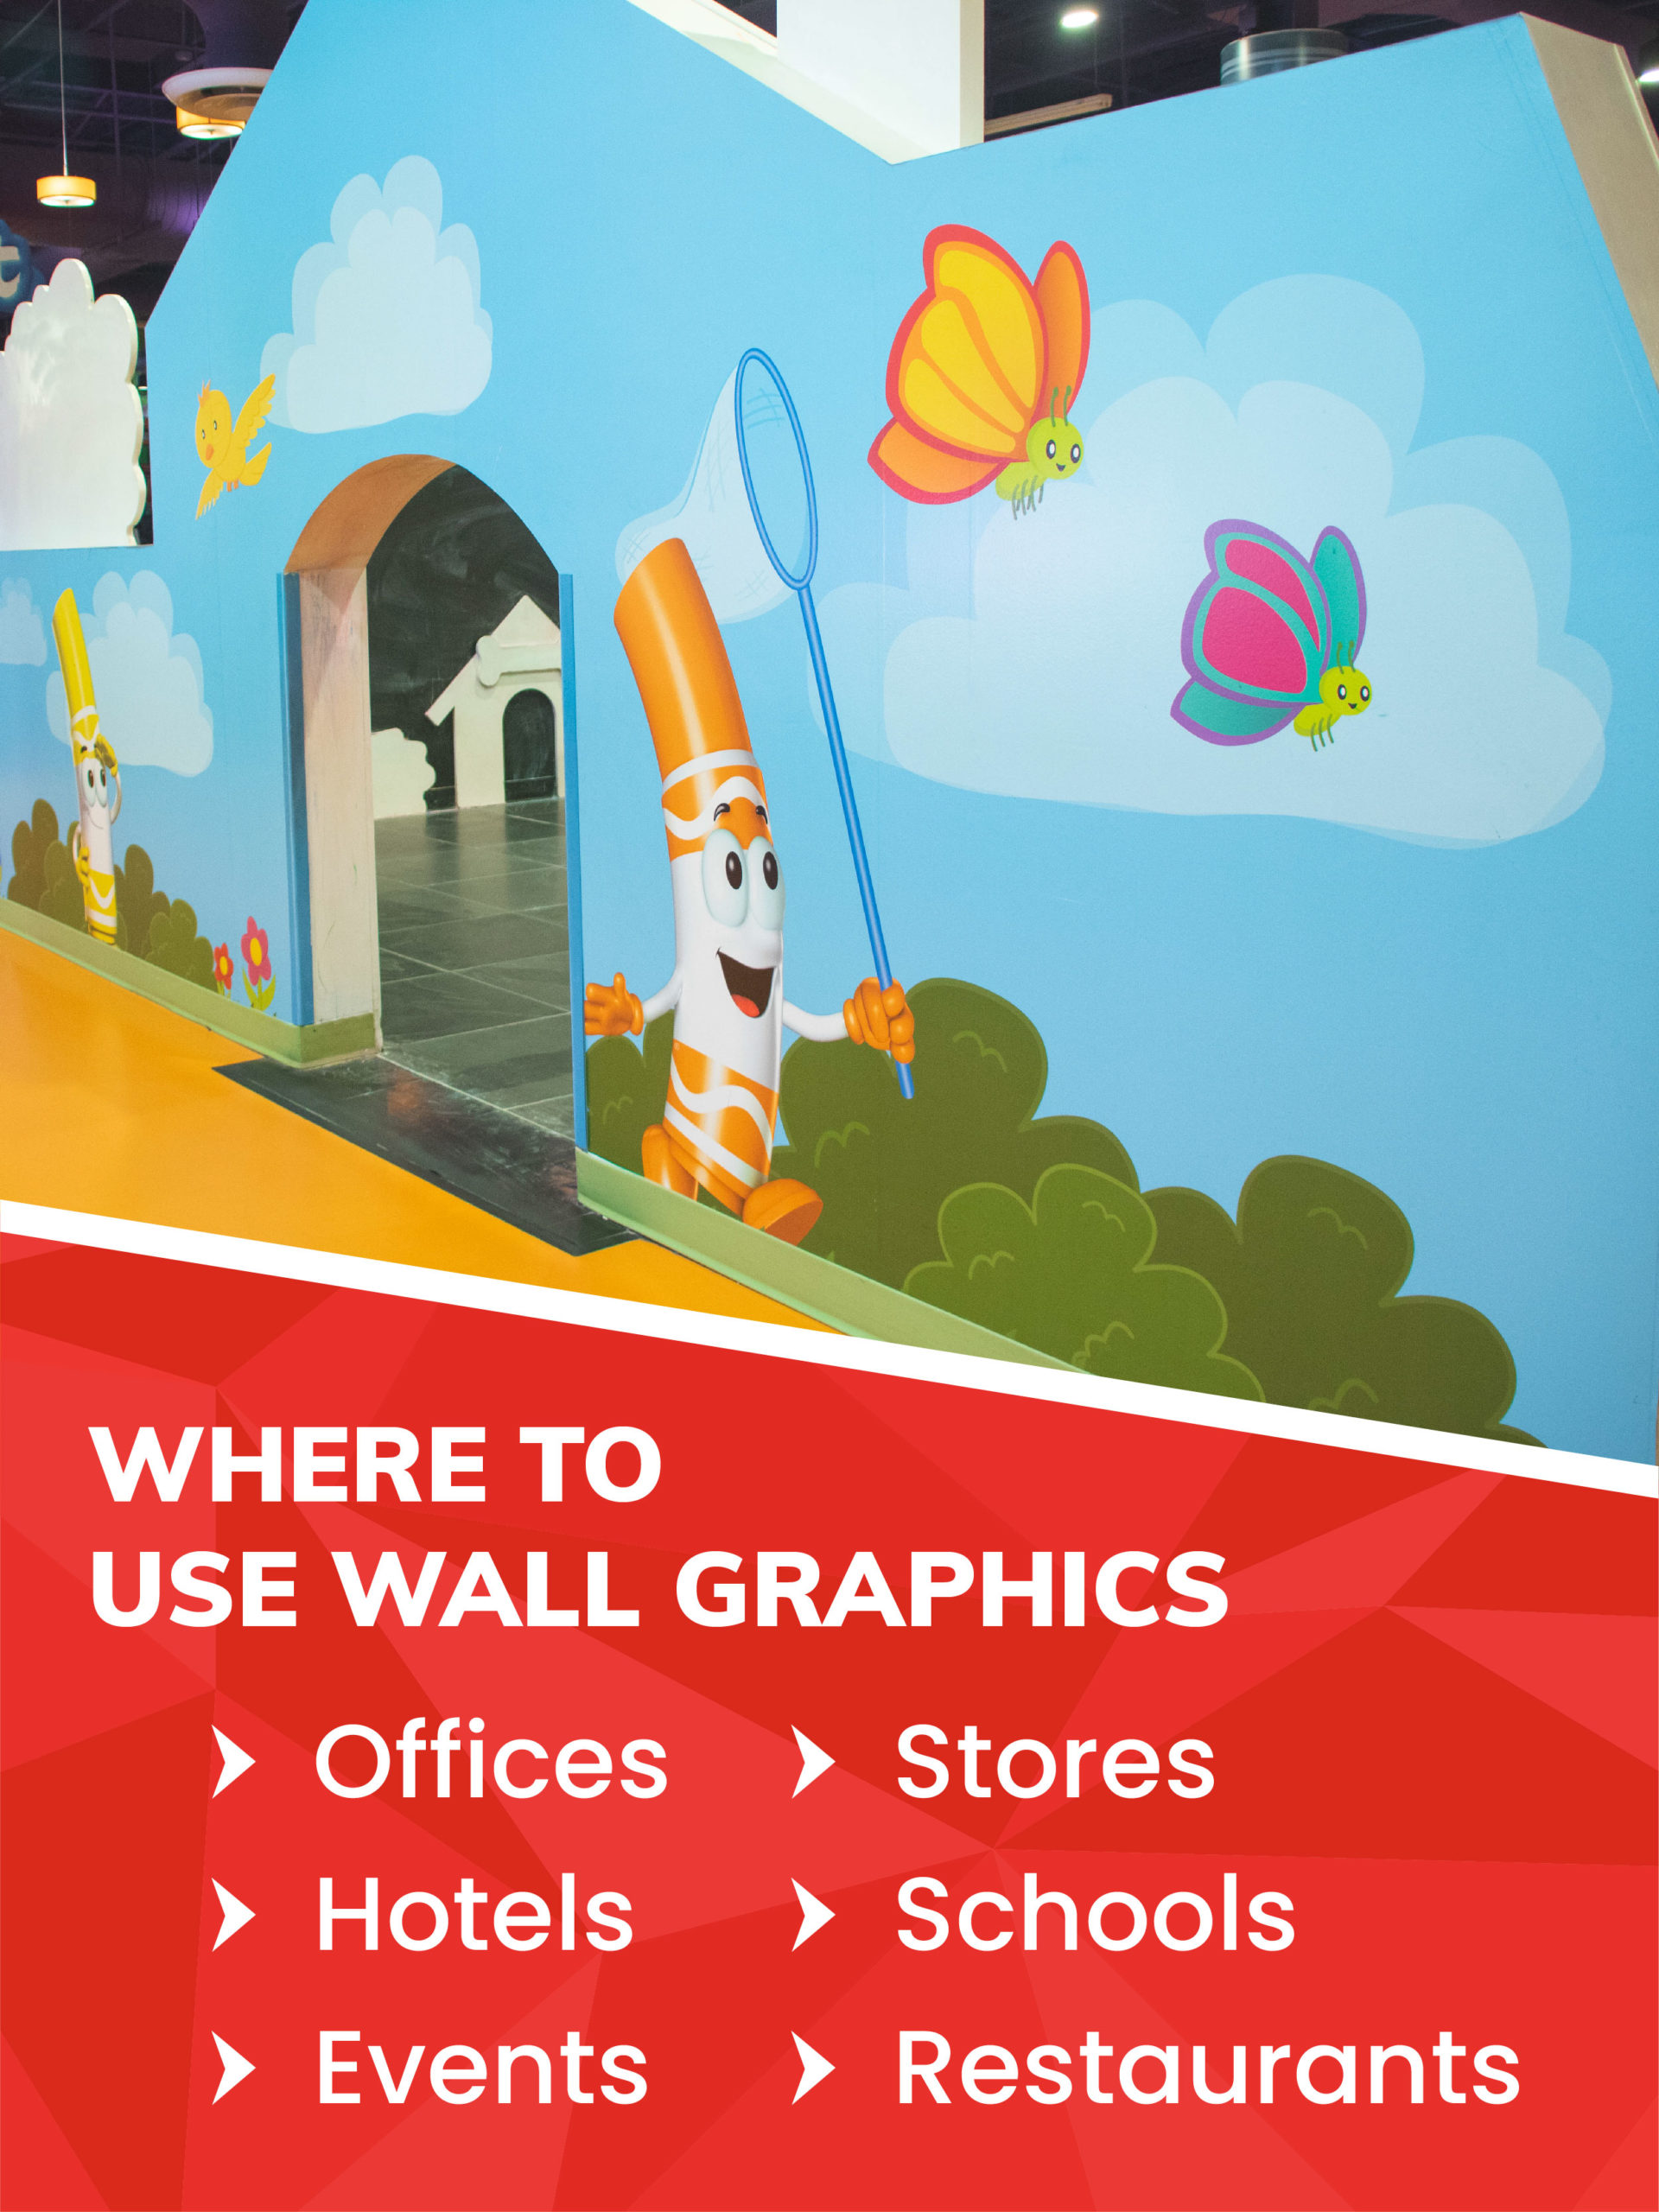 Common uses for wall graphics in Orlando